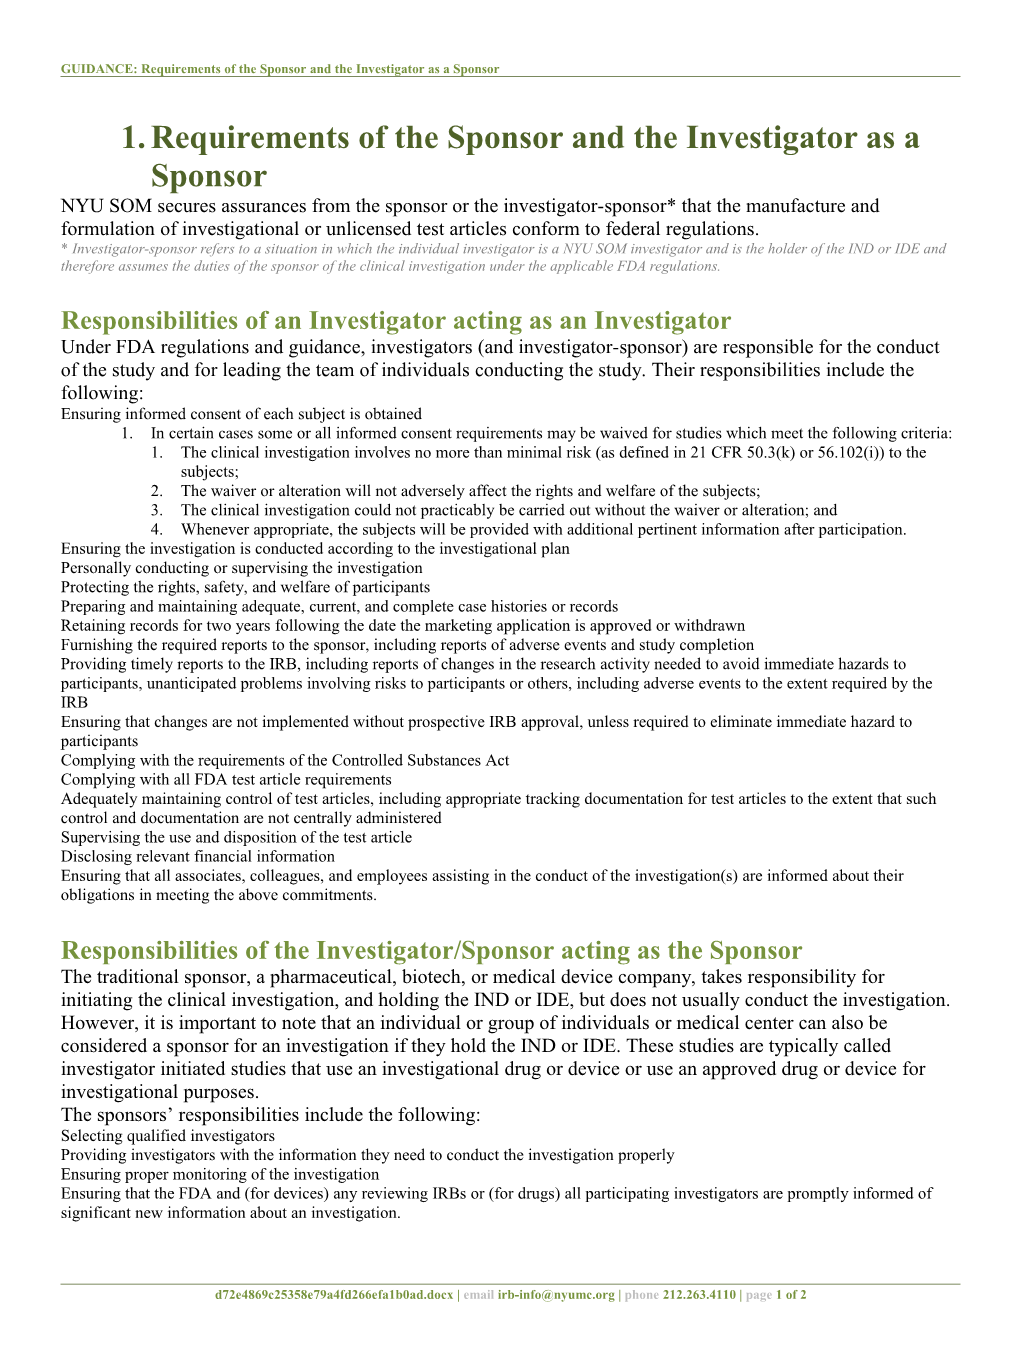 GUIDANCE: Requirements of the Sponsor and the Investigator As a Sponsor